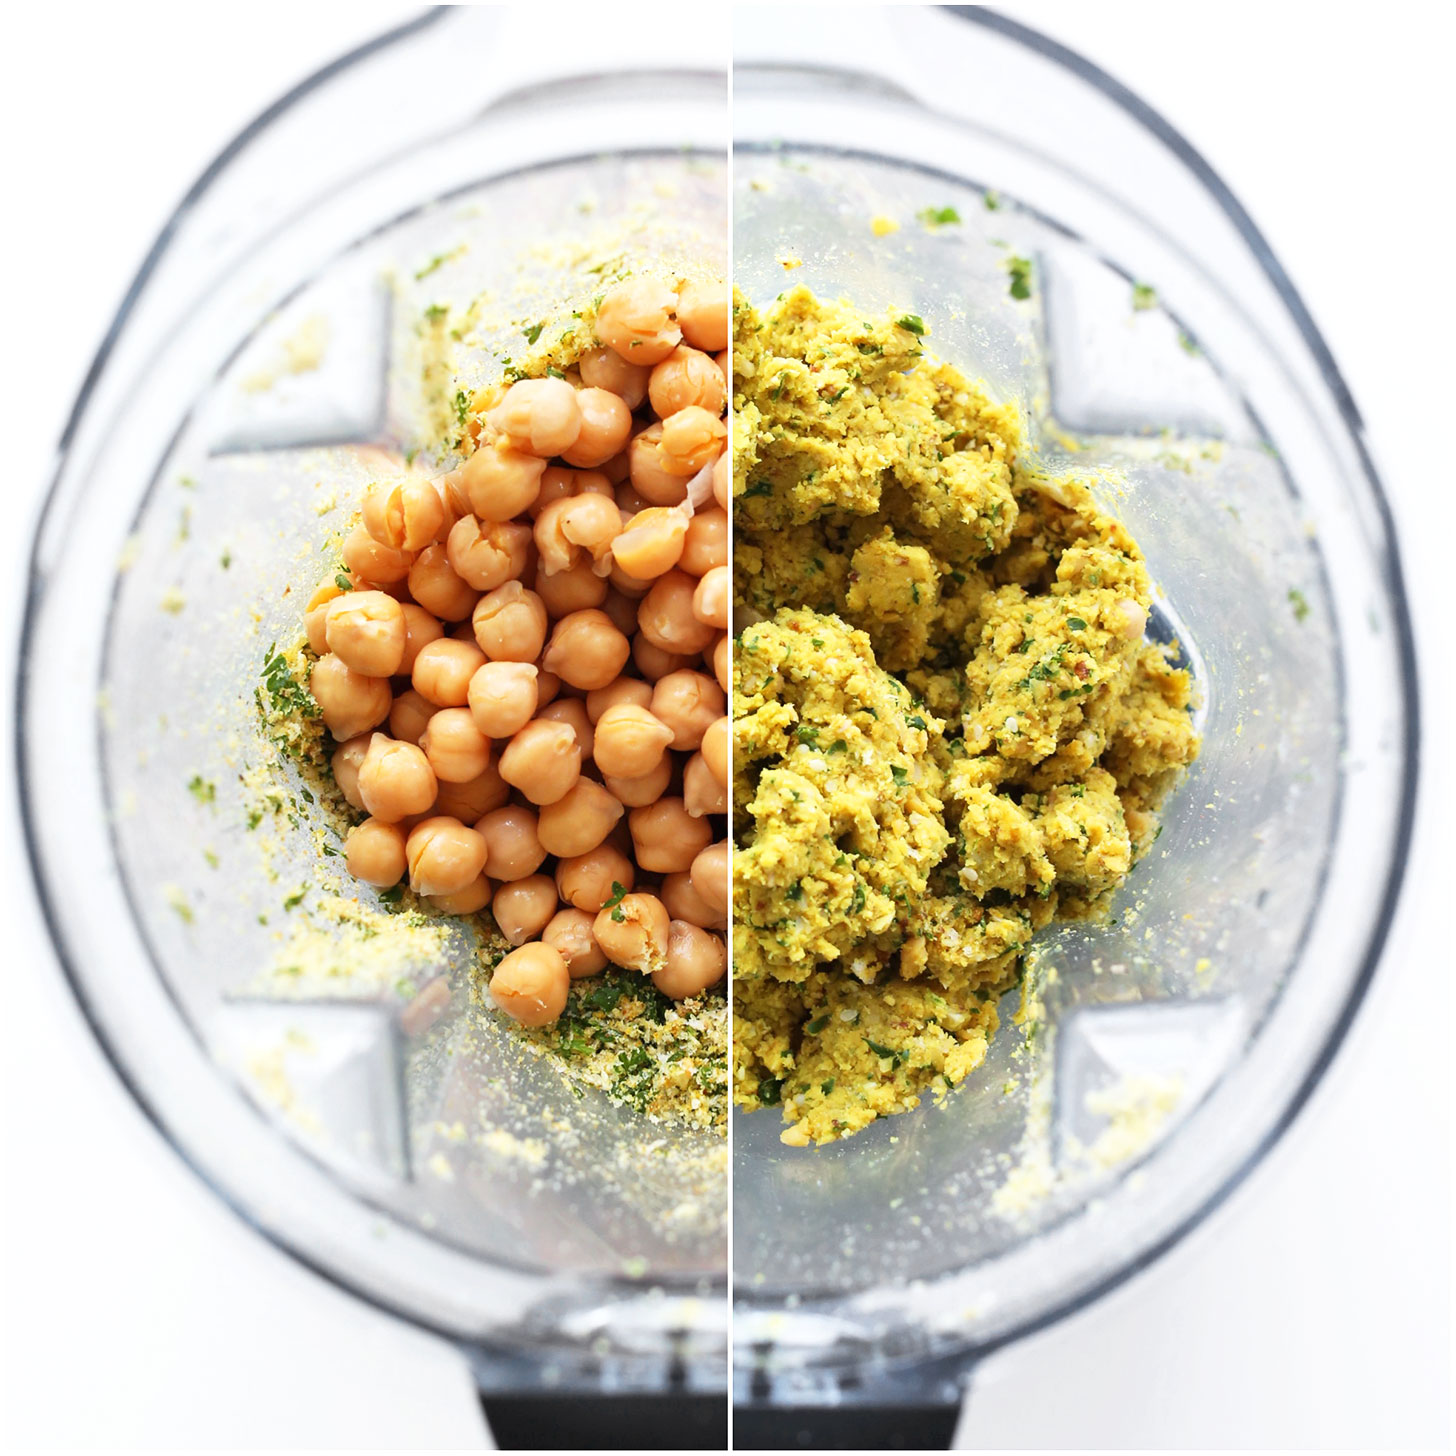 Blender before and after photos of our Turmeric Chickpea Fritters